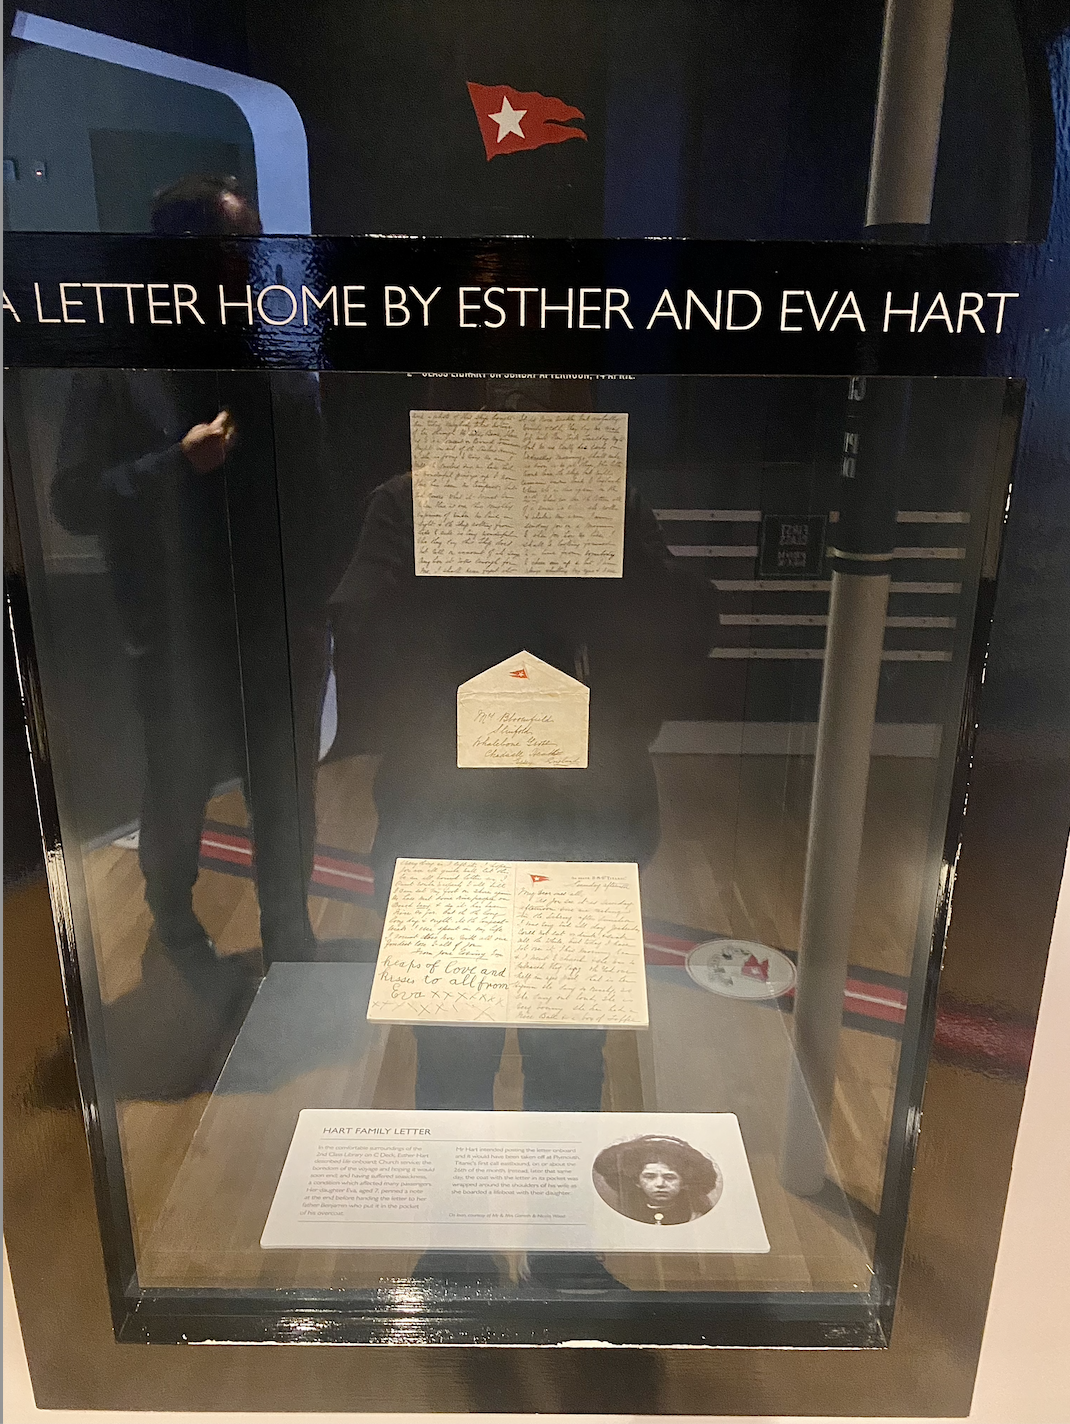 the letter on display with a photo of esther hart